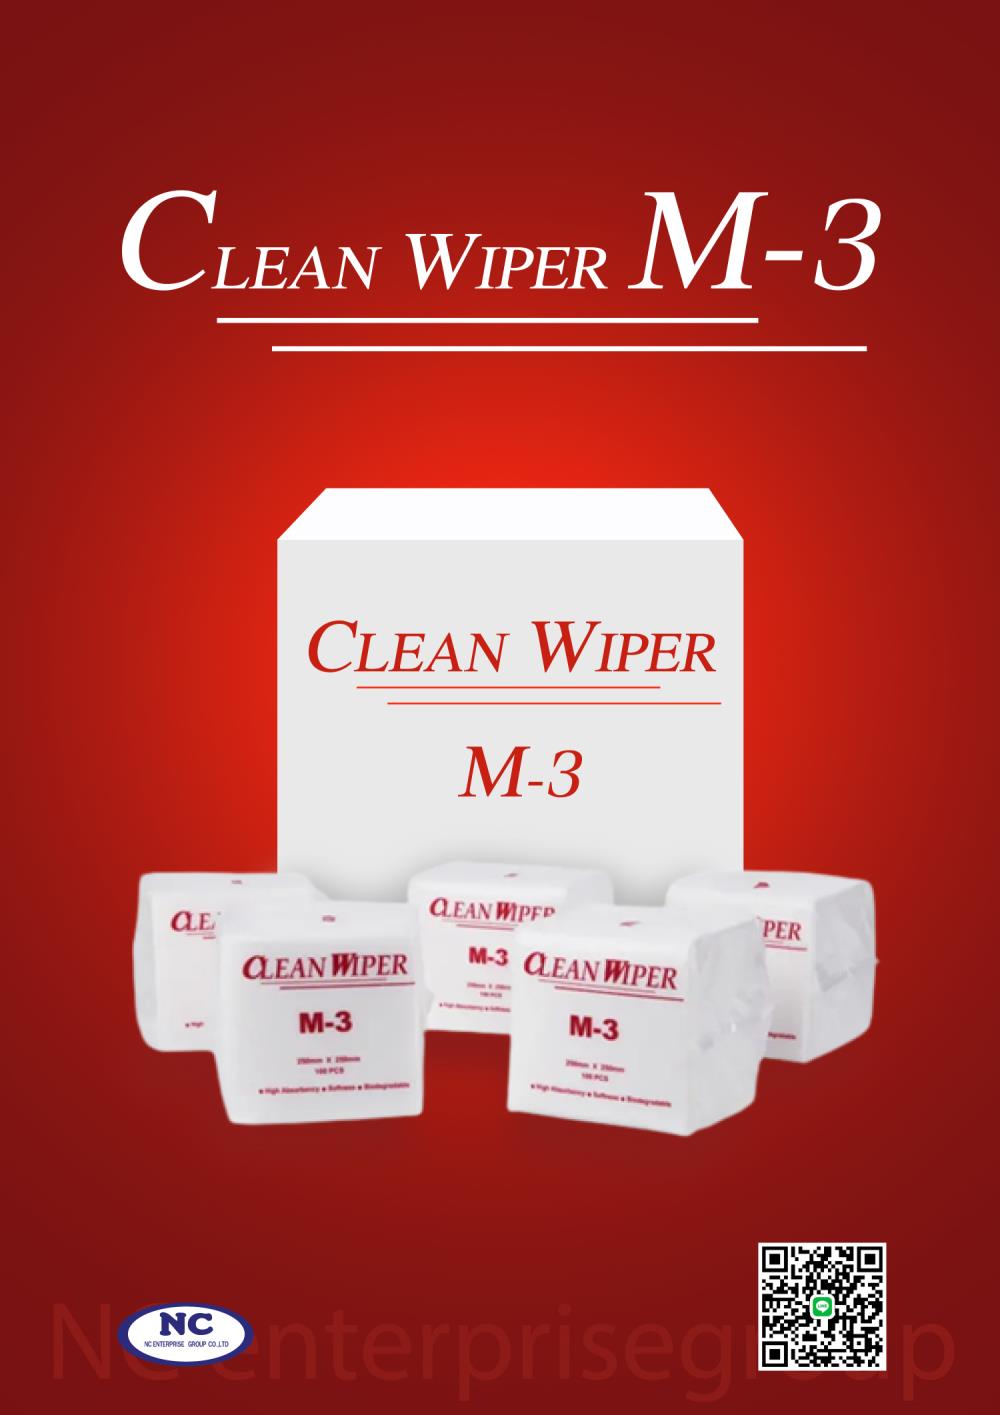 CLEAN WIPER M3,ผ้าเช็ดชิ้นงาน M-3,,Machinery and Process Equipment/Cleanrooms